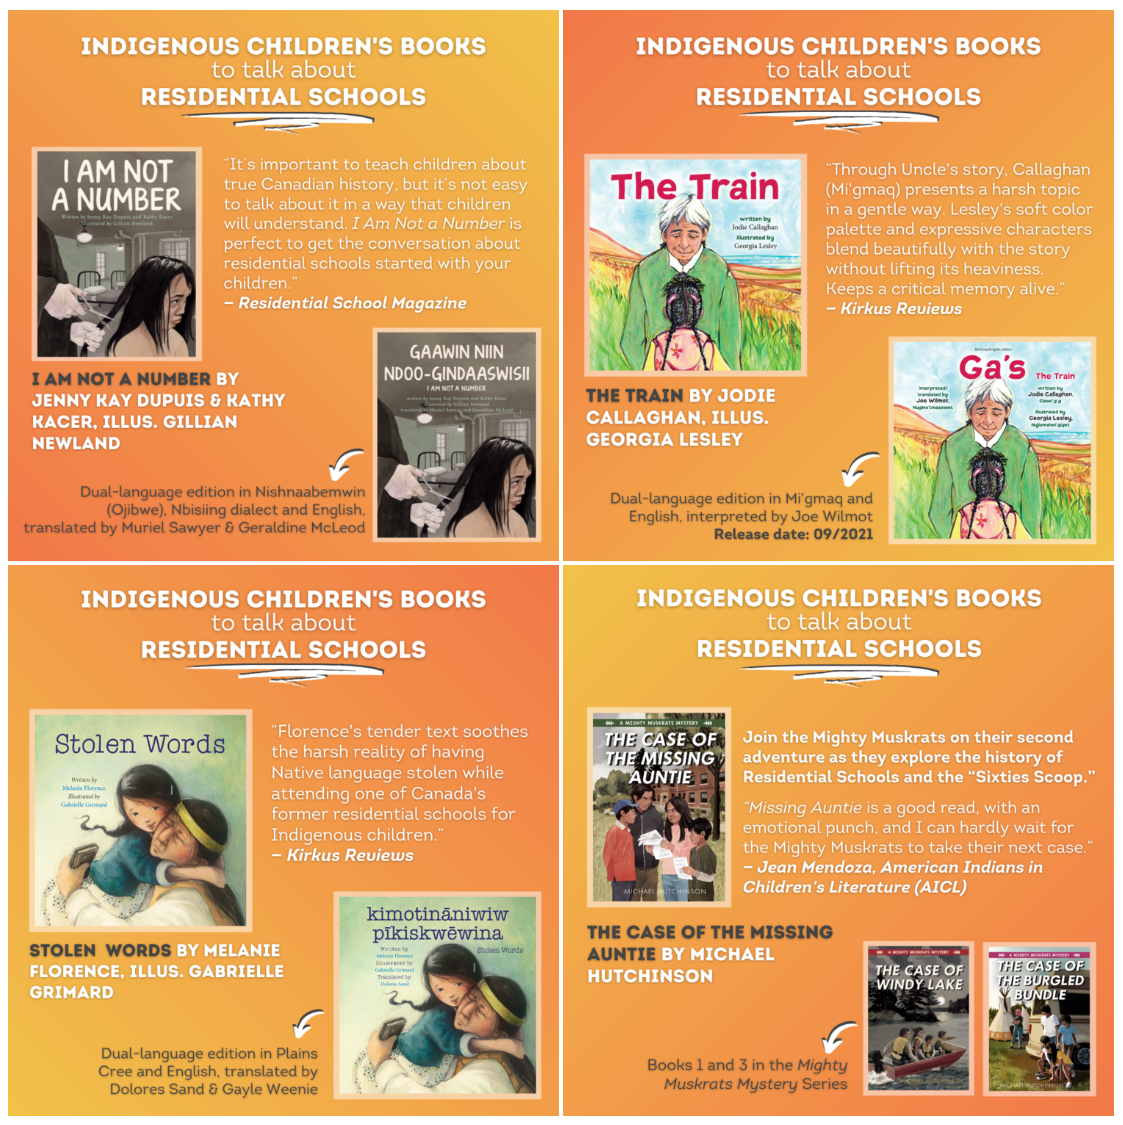 Image: Indigenous Children's Books to talk about Residential Schools